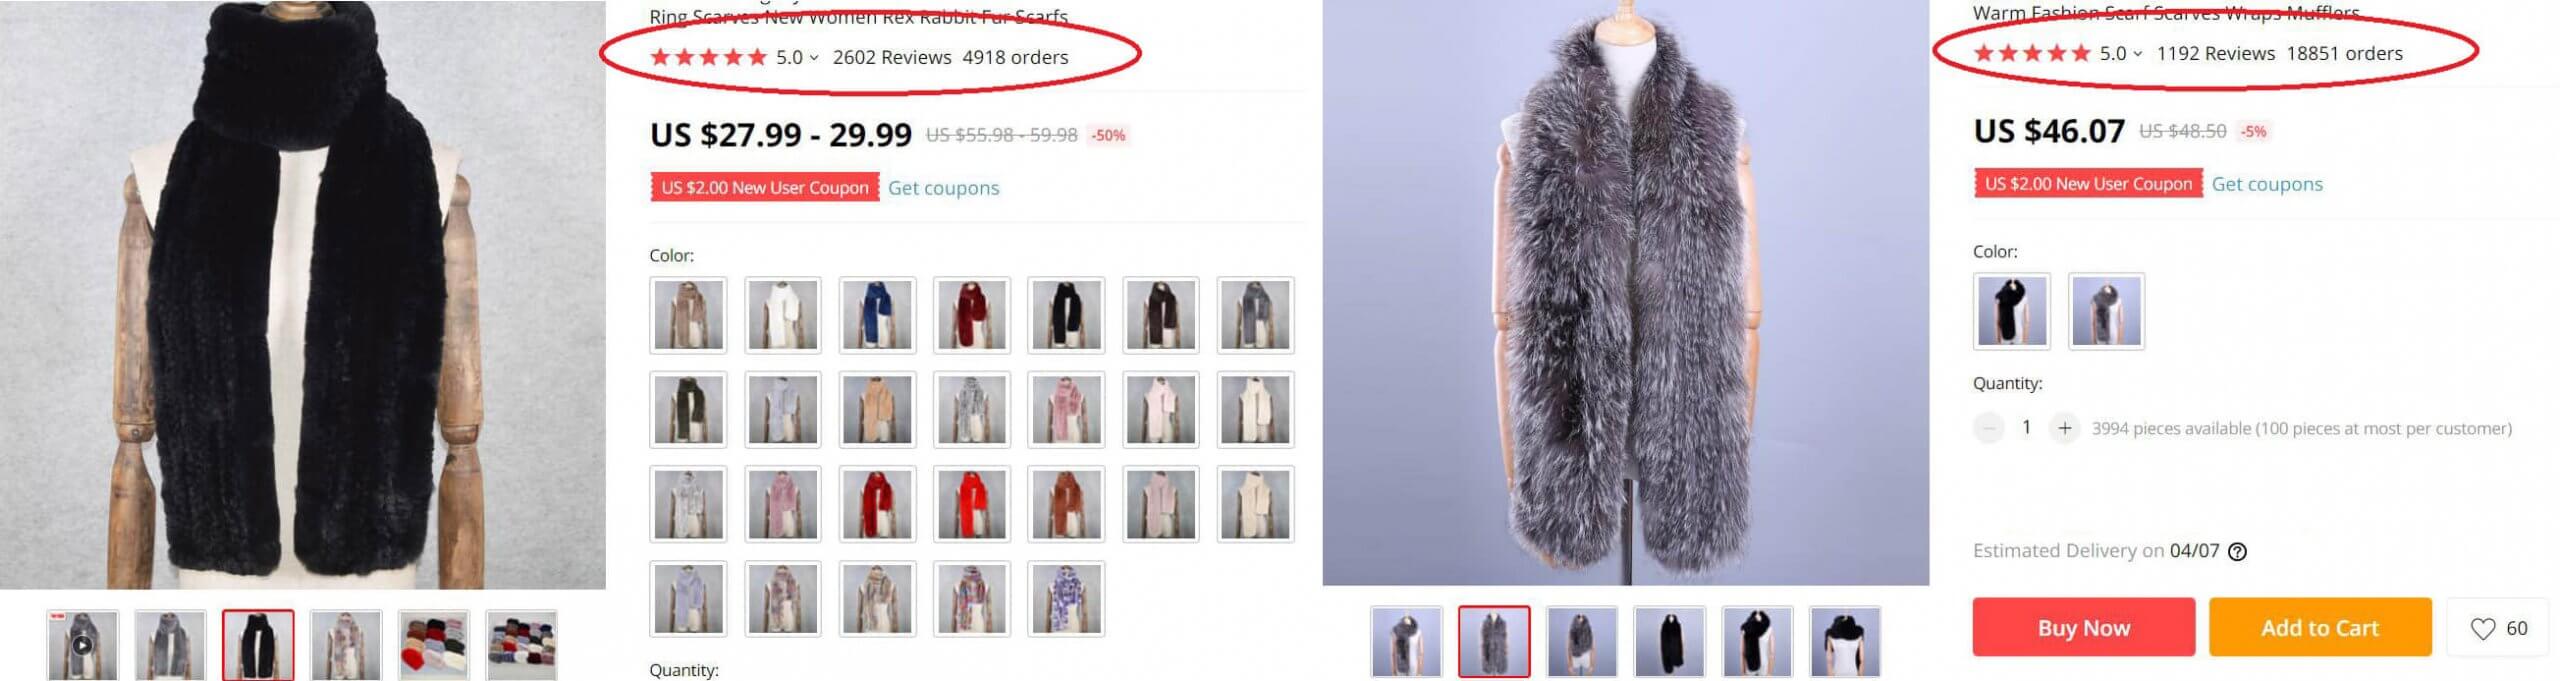 Fur Knitted Scarf: Ultimate Purchasing Guide for Wholesalers and Retailers